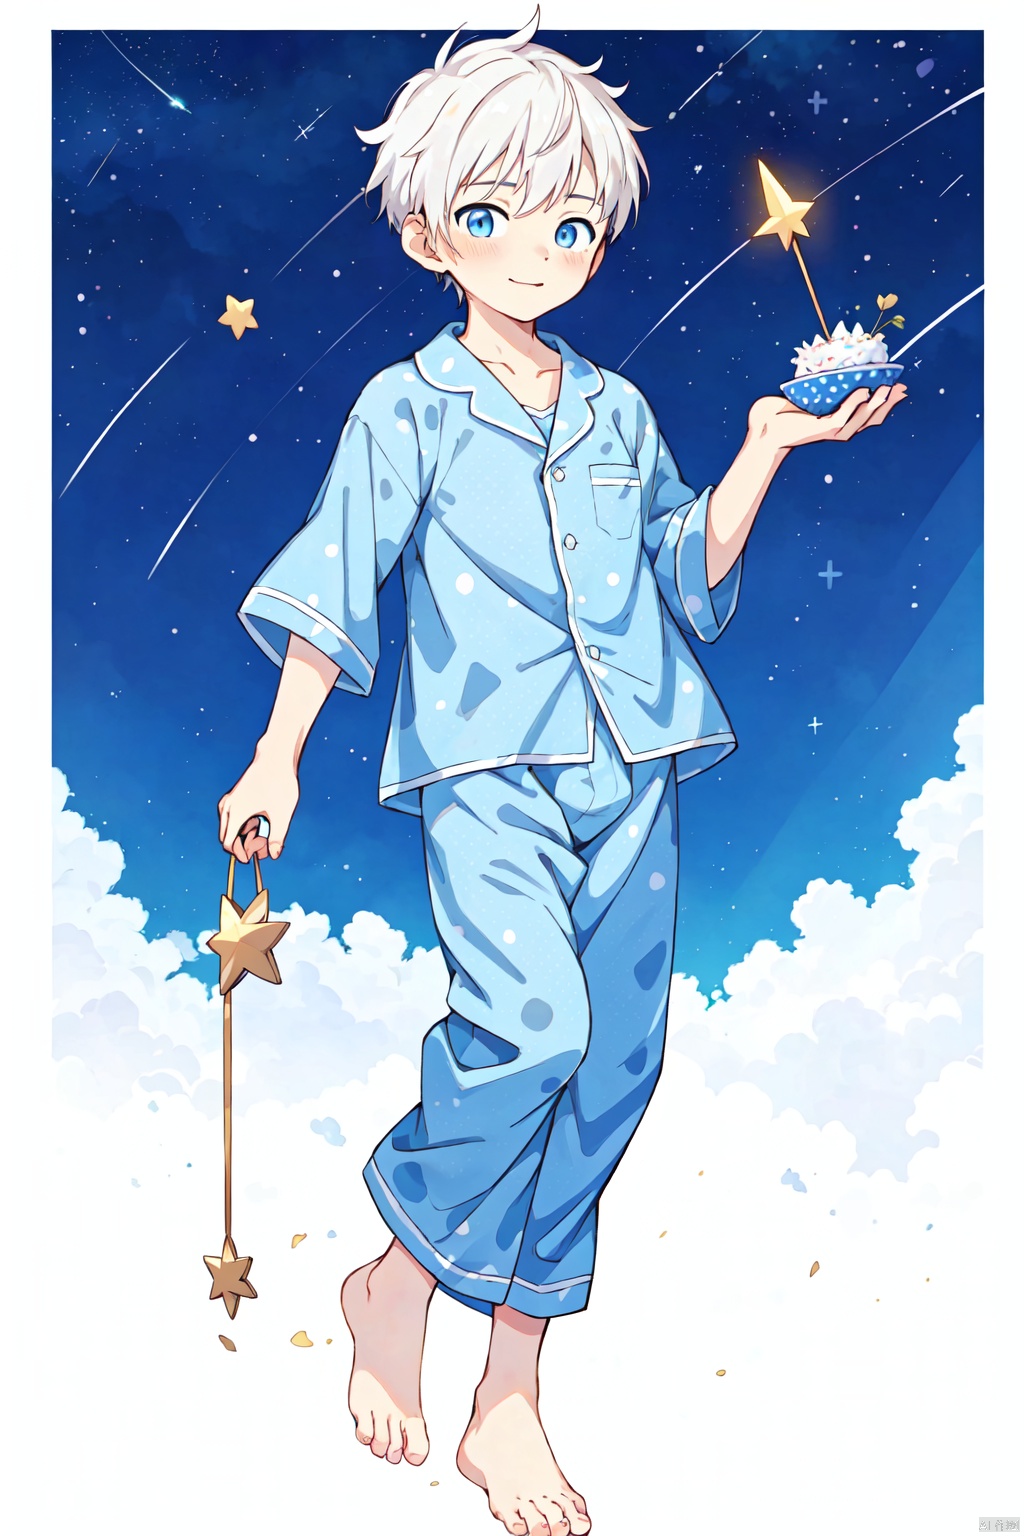  anime,8K,boy,juvenile,Seventeen,whiter hair,blue eye,barefoot,Blue pajamas, Holding a five pointed star in hand, decorated with stars, dotted with dots